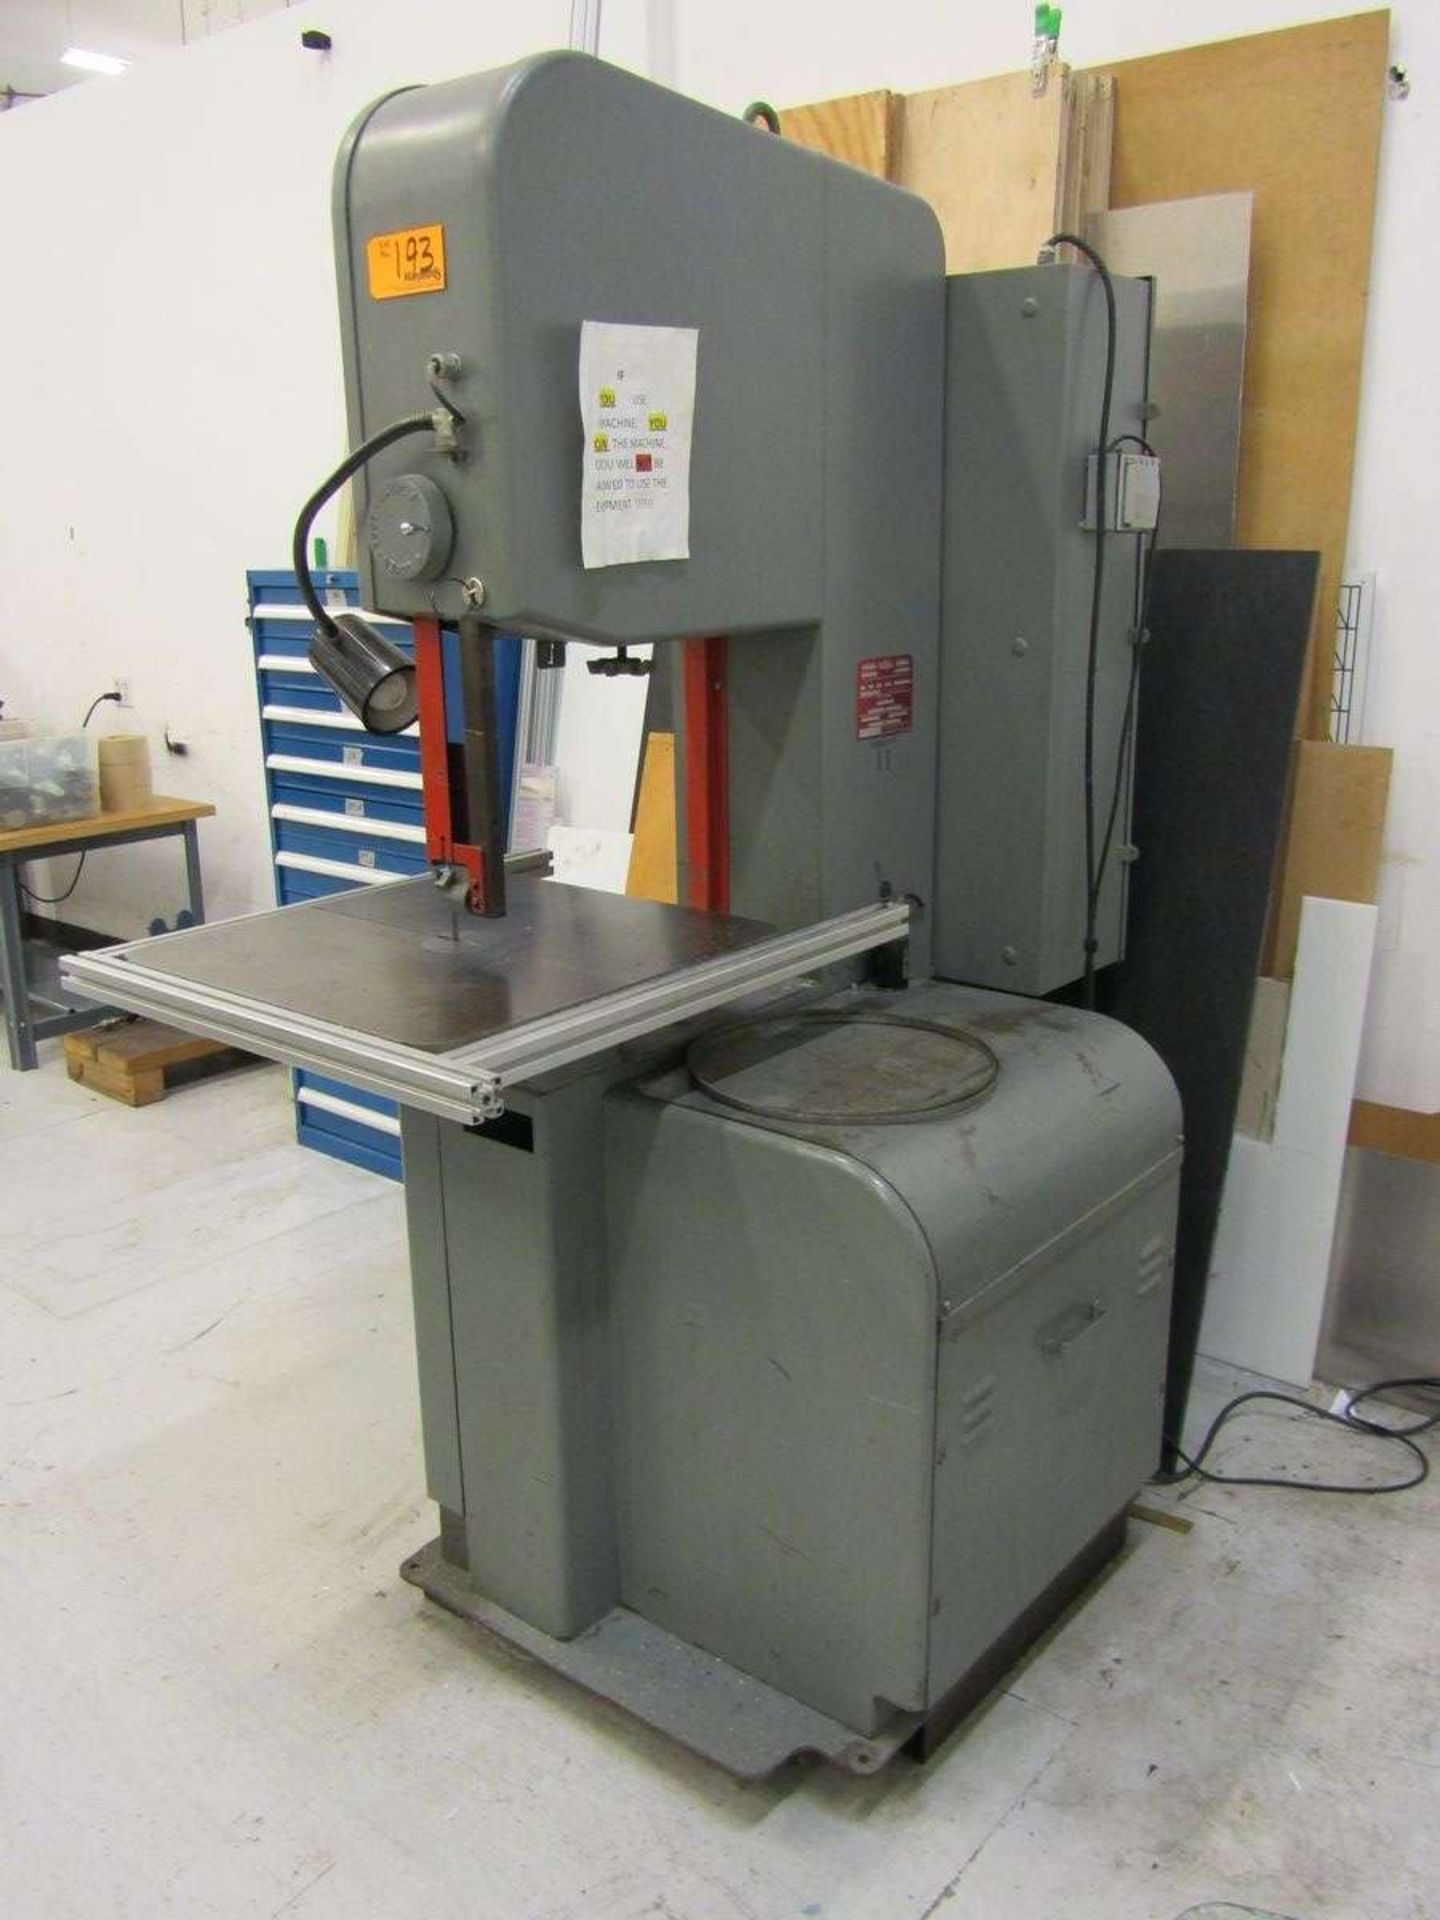 DoAll 20" Vertical Band Saw, Model 2013-2 - Image 2 of 7